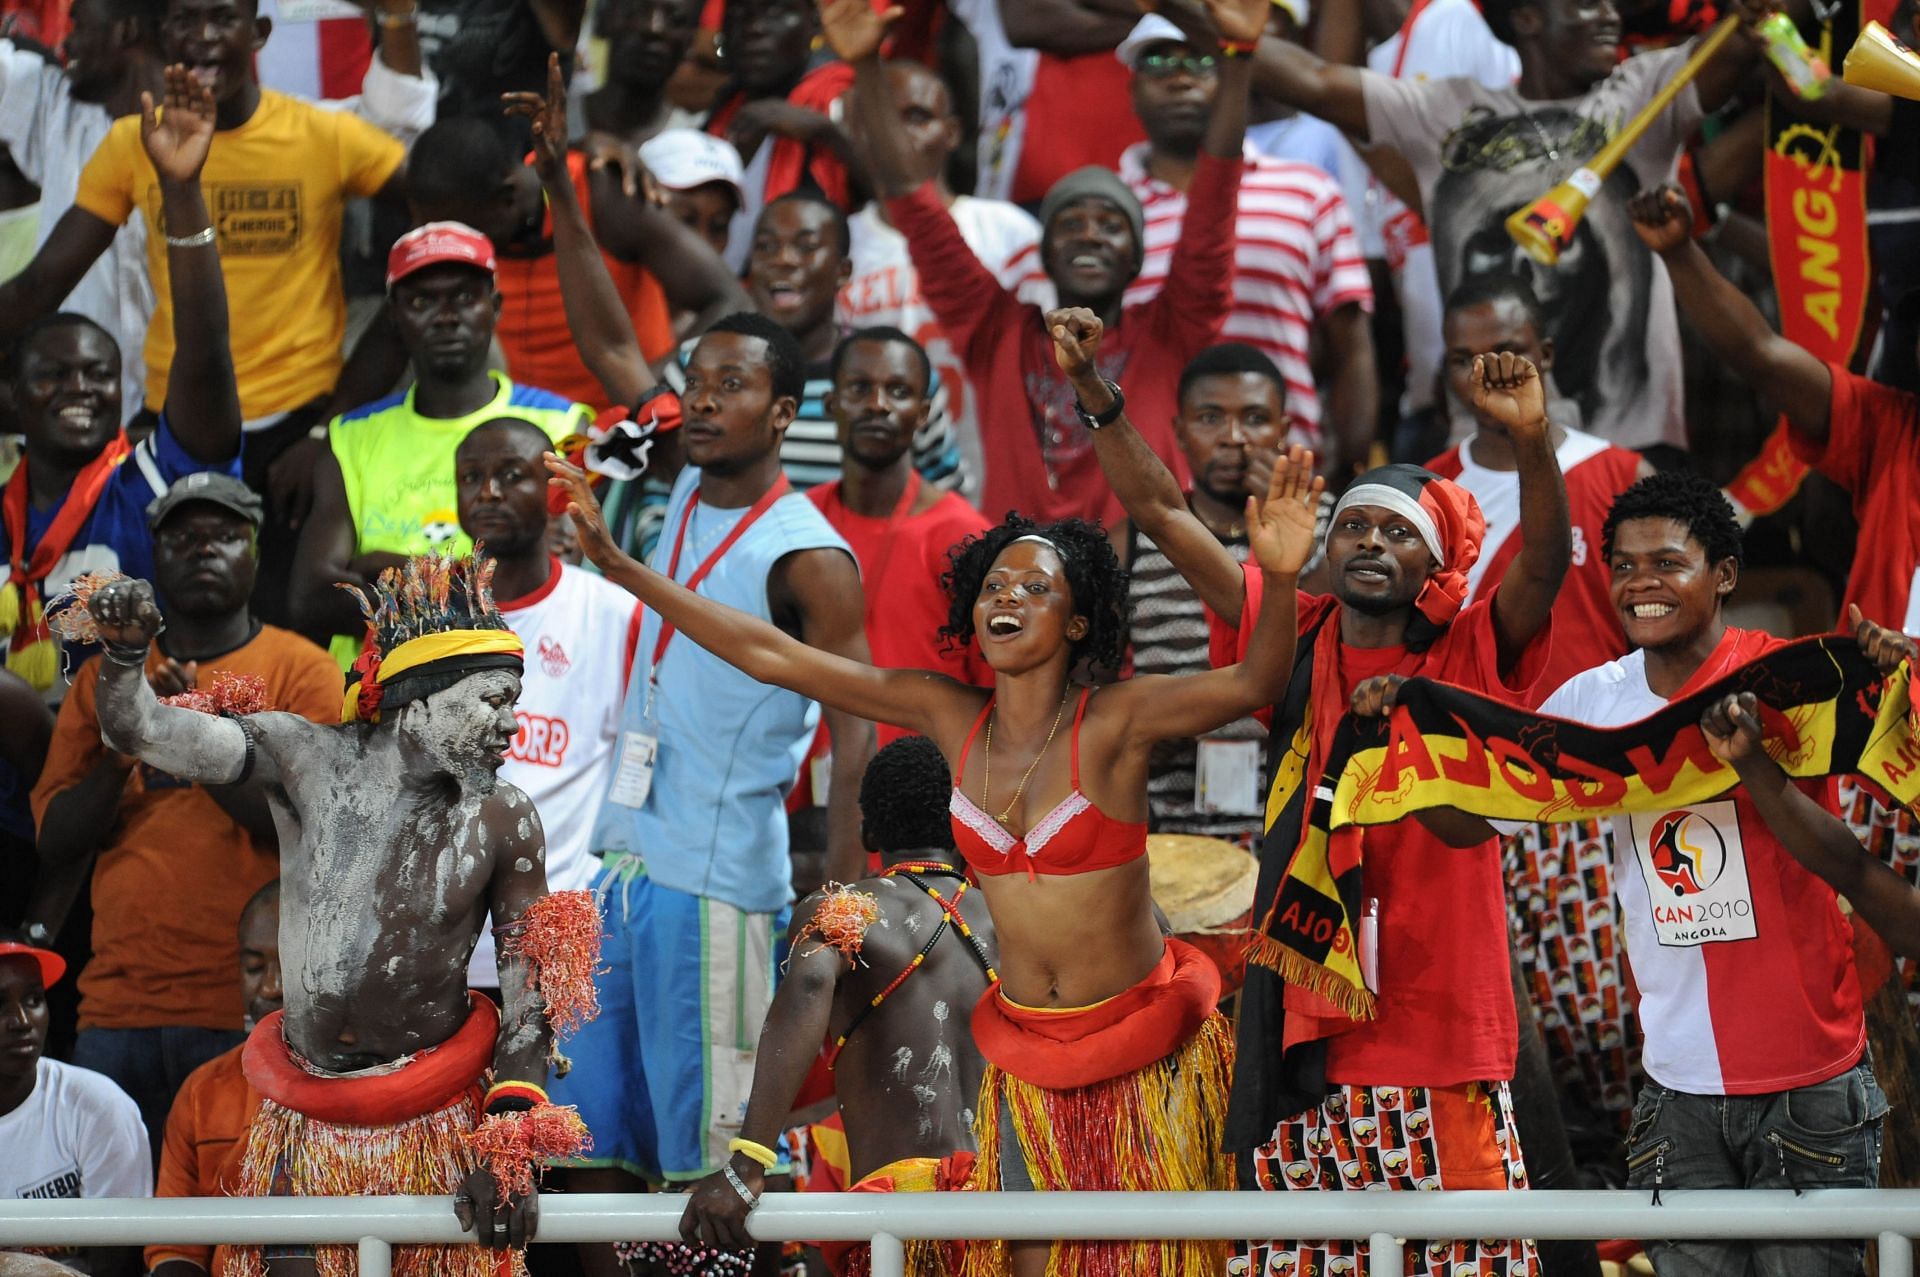 Angola v Malawi Group A - African Cup of Nations